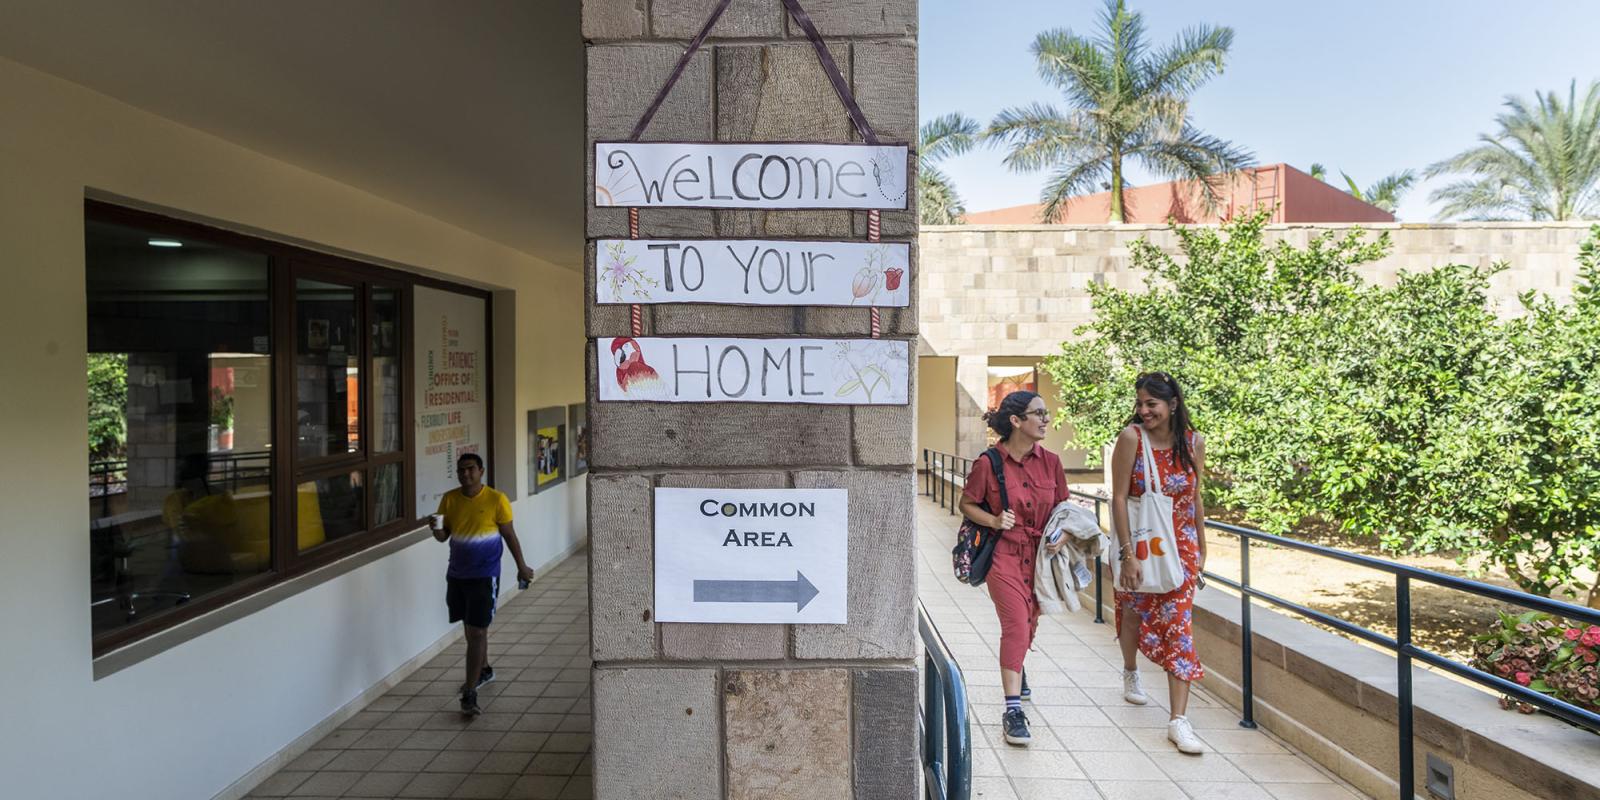 Two female students walking and talking together and a male student walking and holding a drinking cup, igns "Welcome to your home" and "Common area"